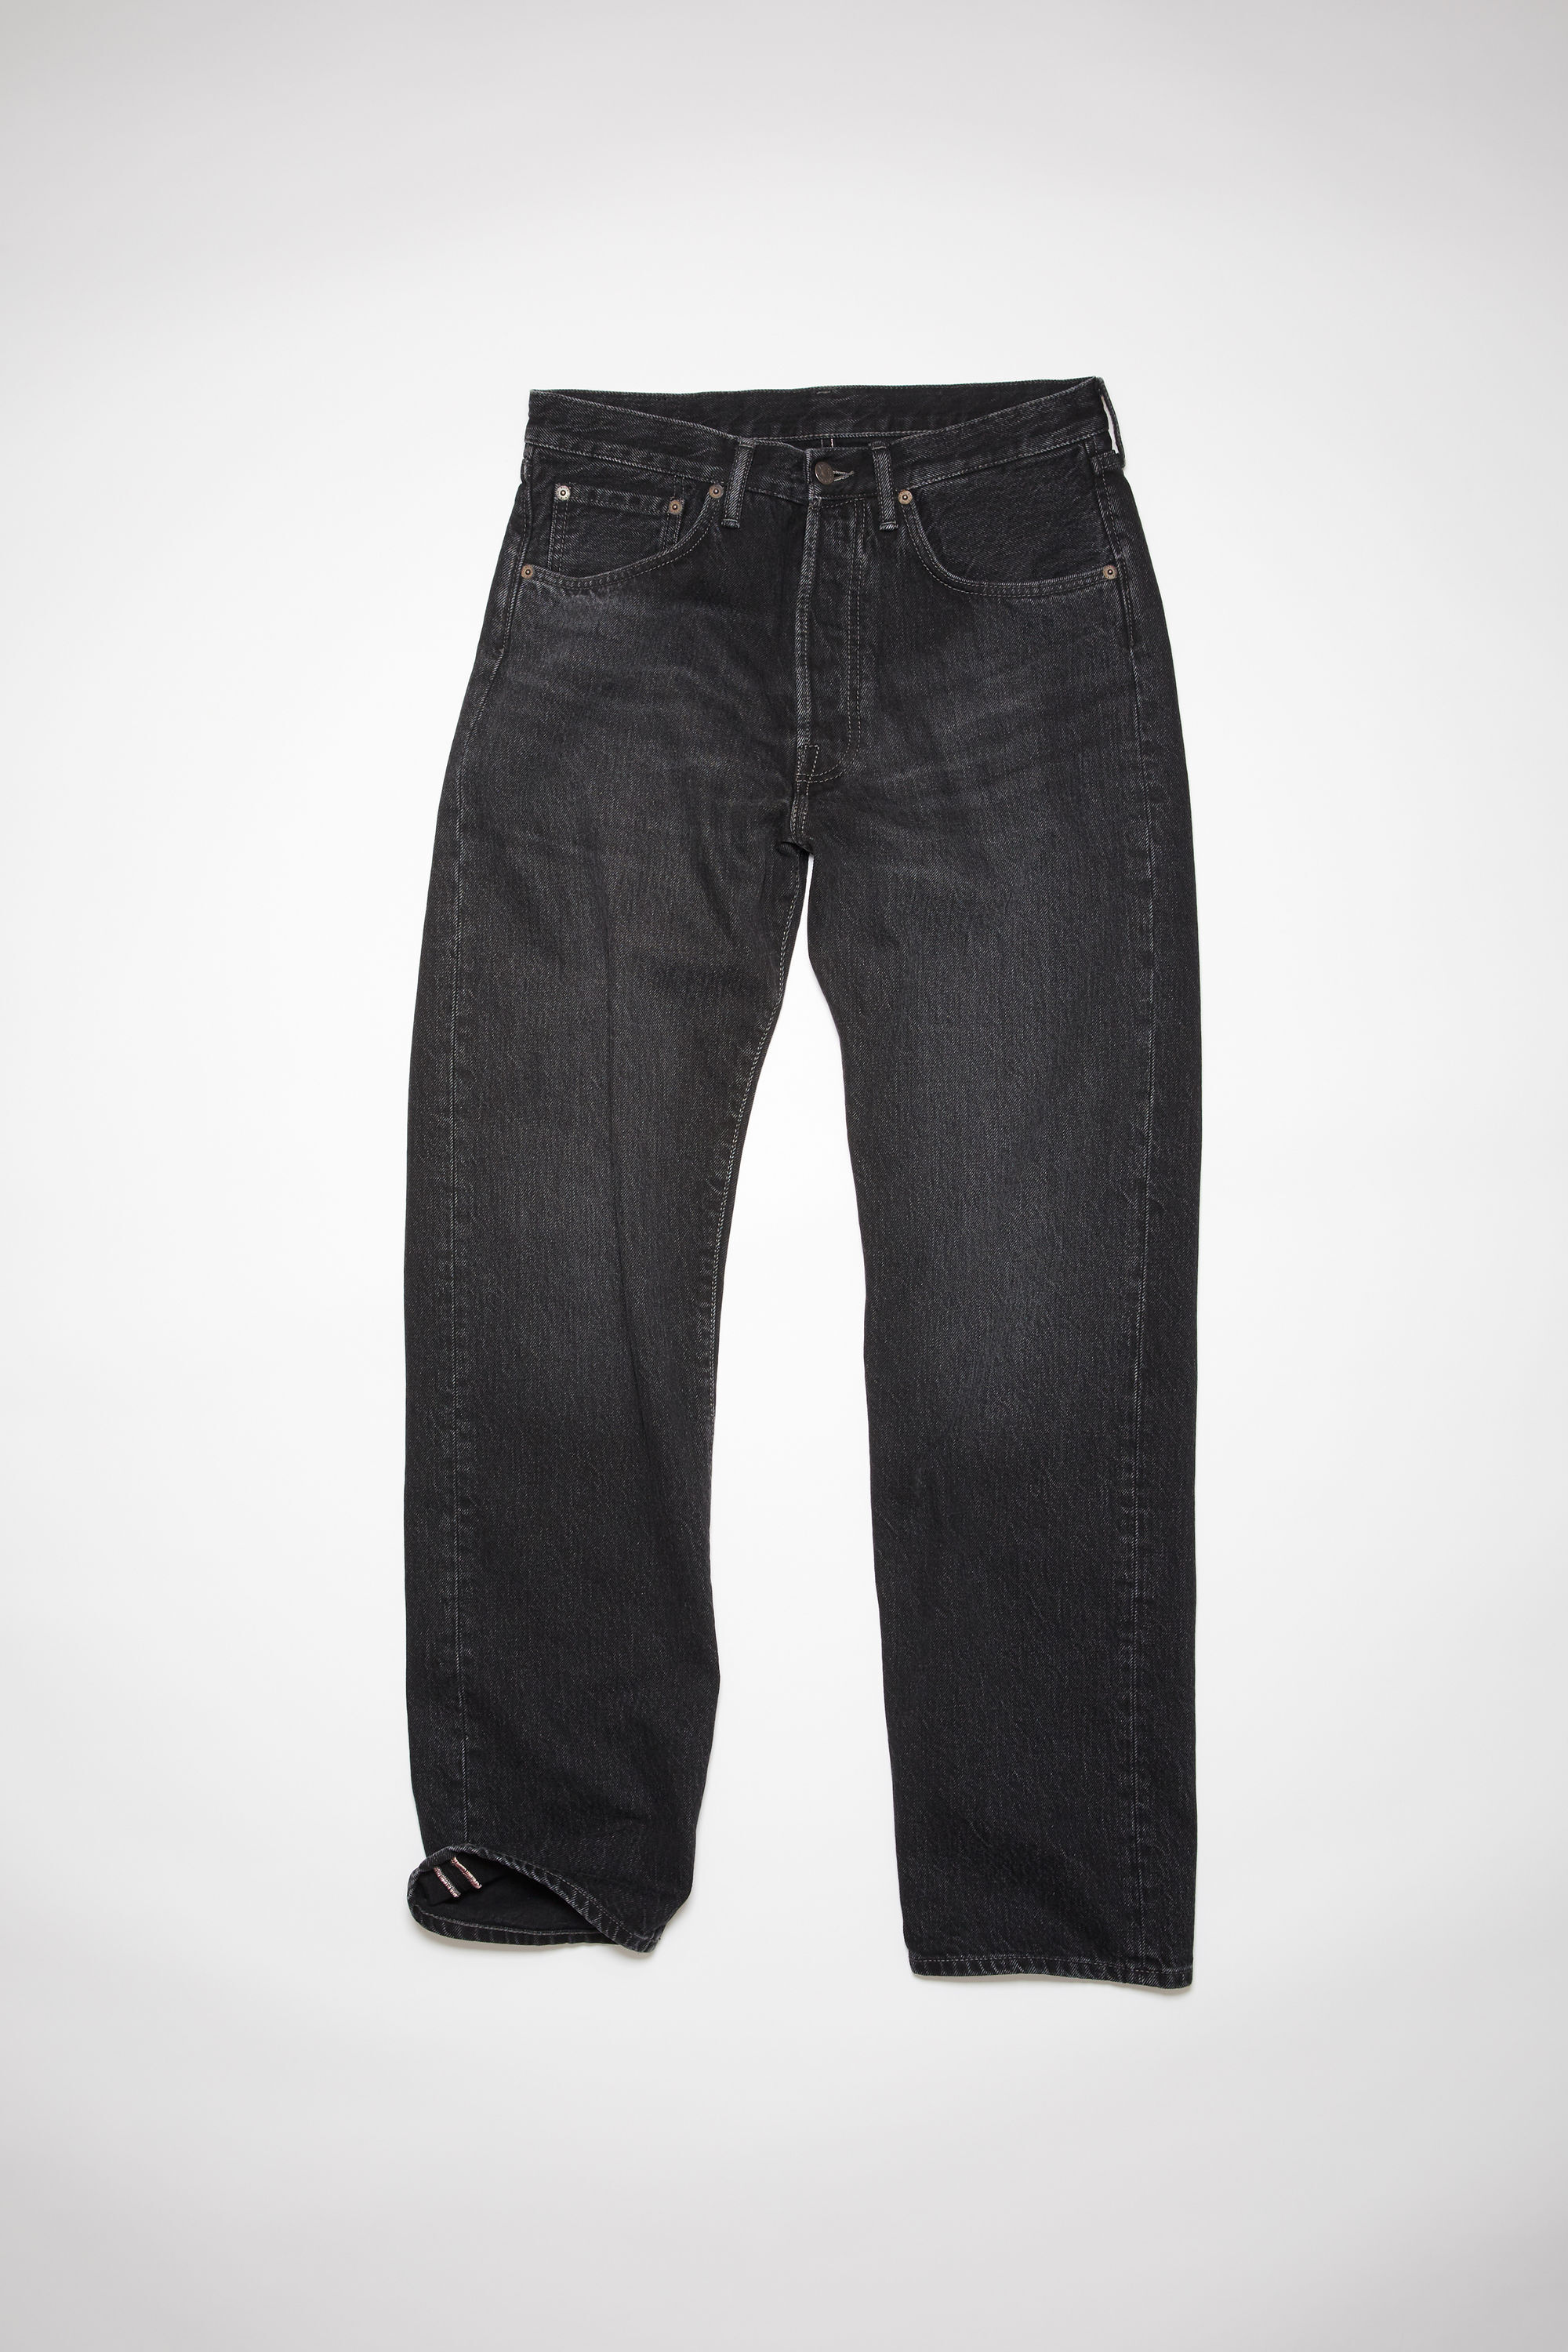 Acne Studios - Relaxed fit jeans - 2003 - Mid Blue